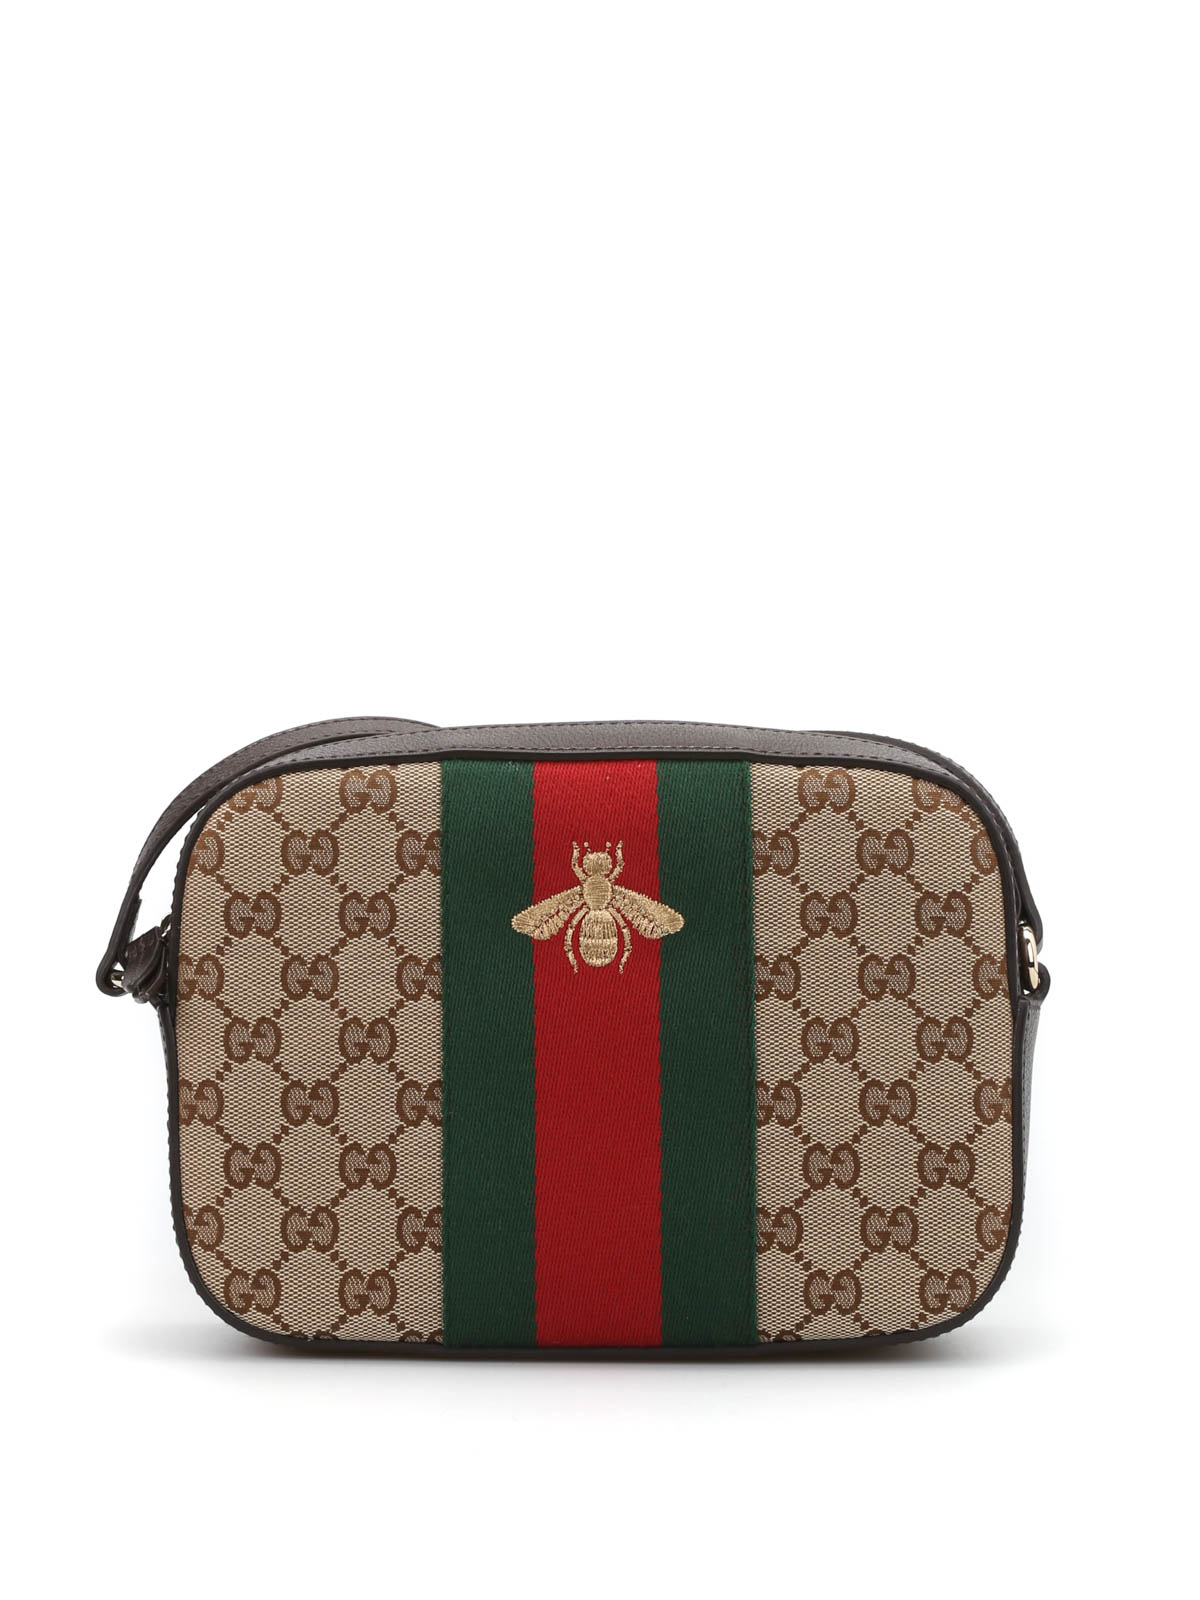 Gucci - Bee embroidery GG canvas bag - cross body bags - 412008 KQWYG 8869